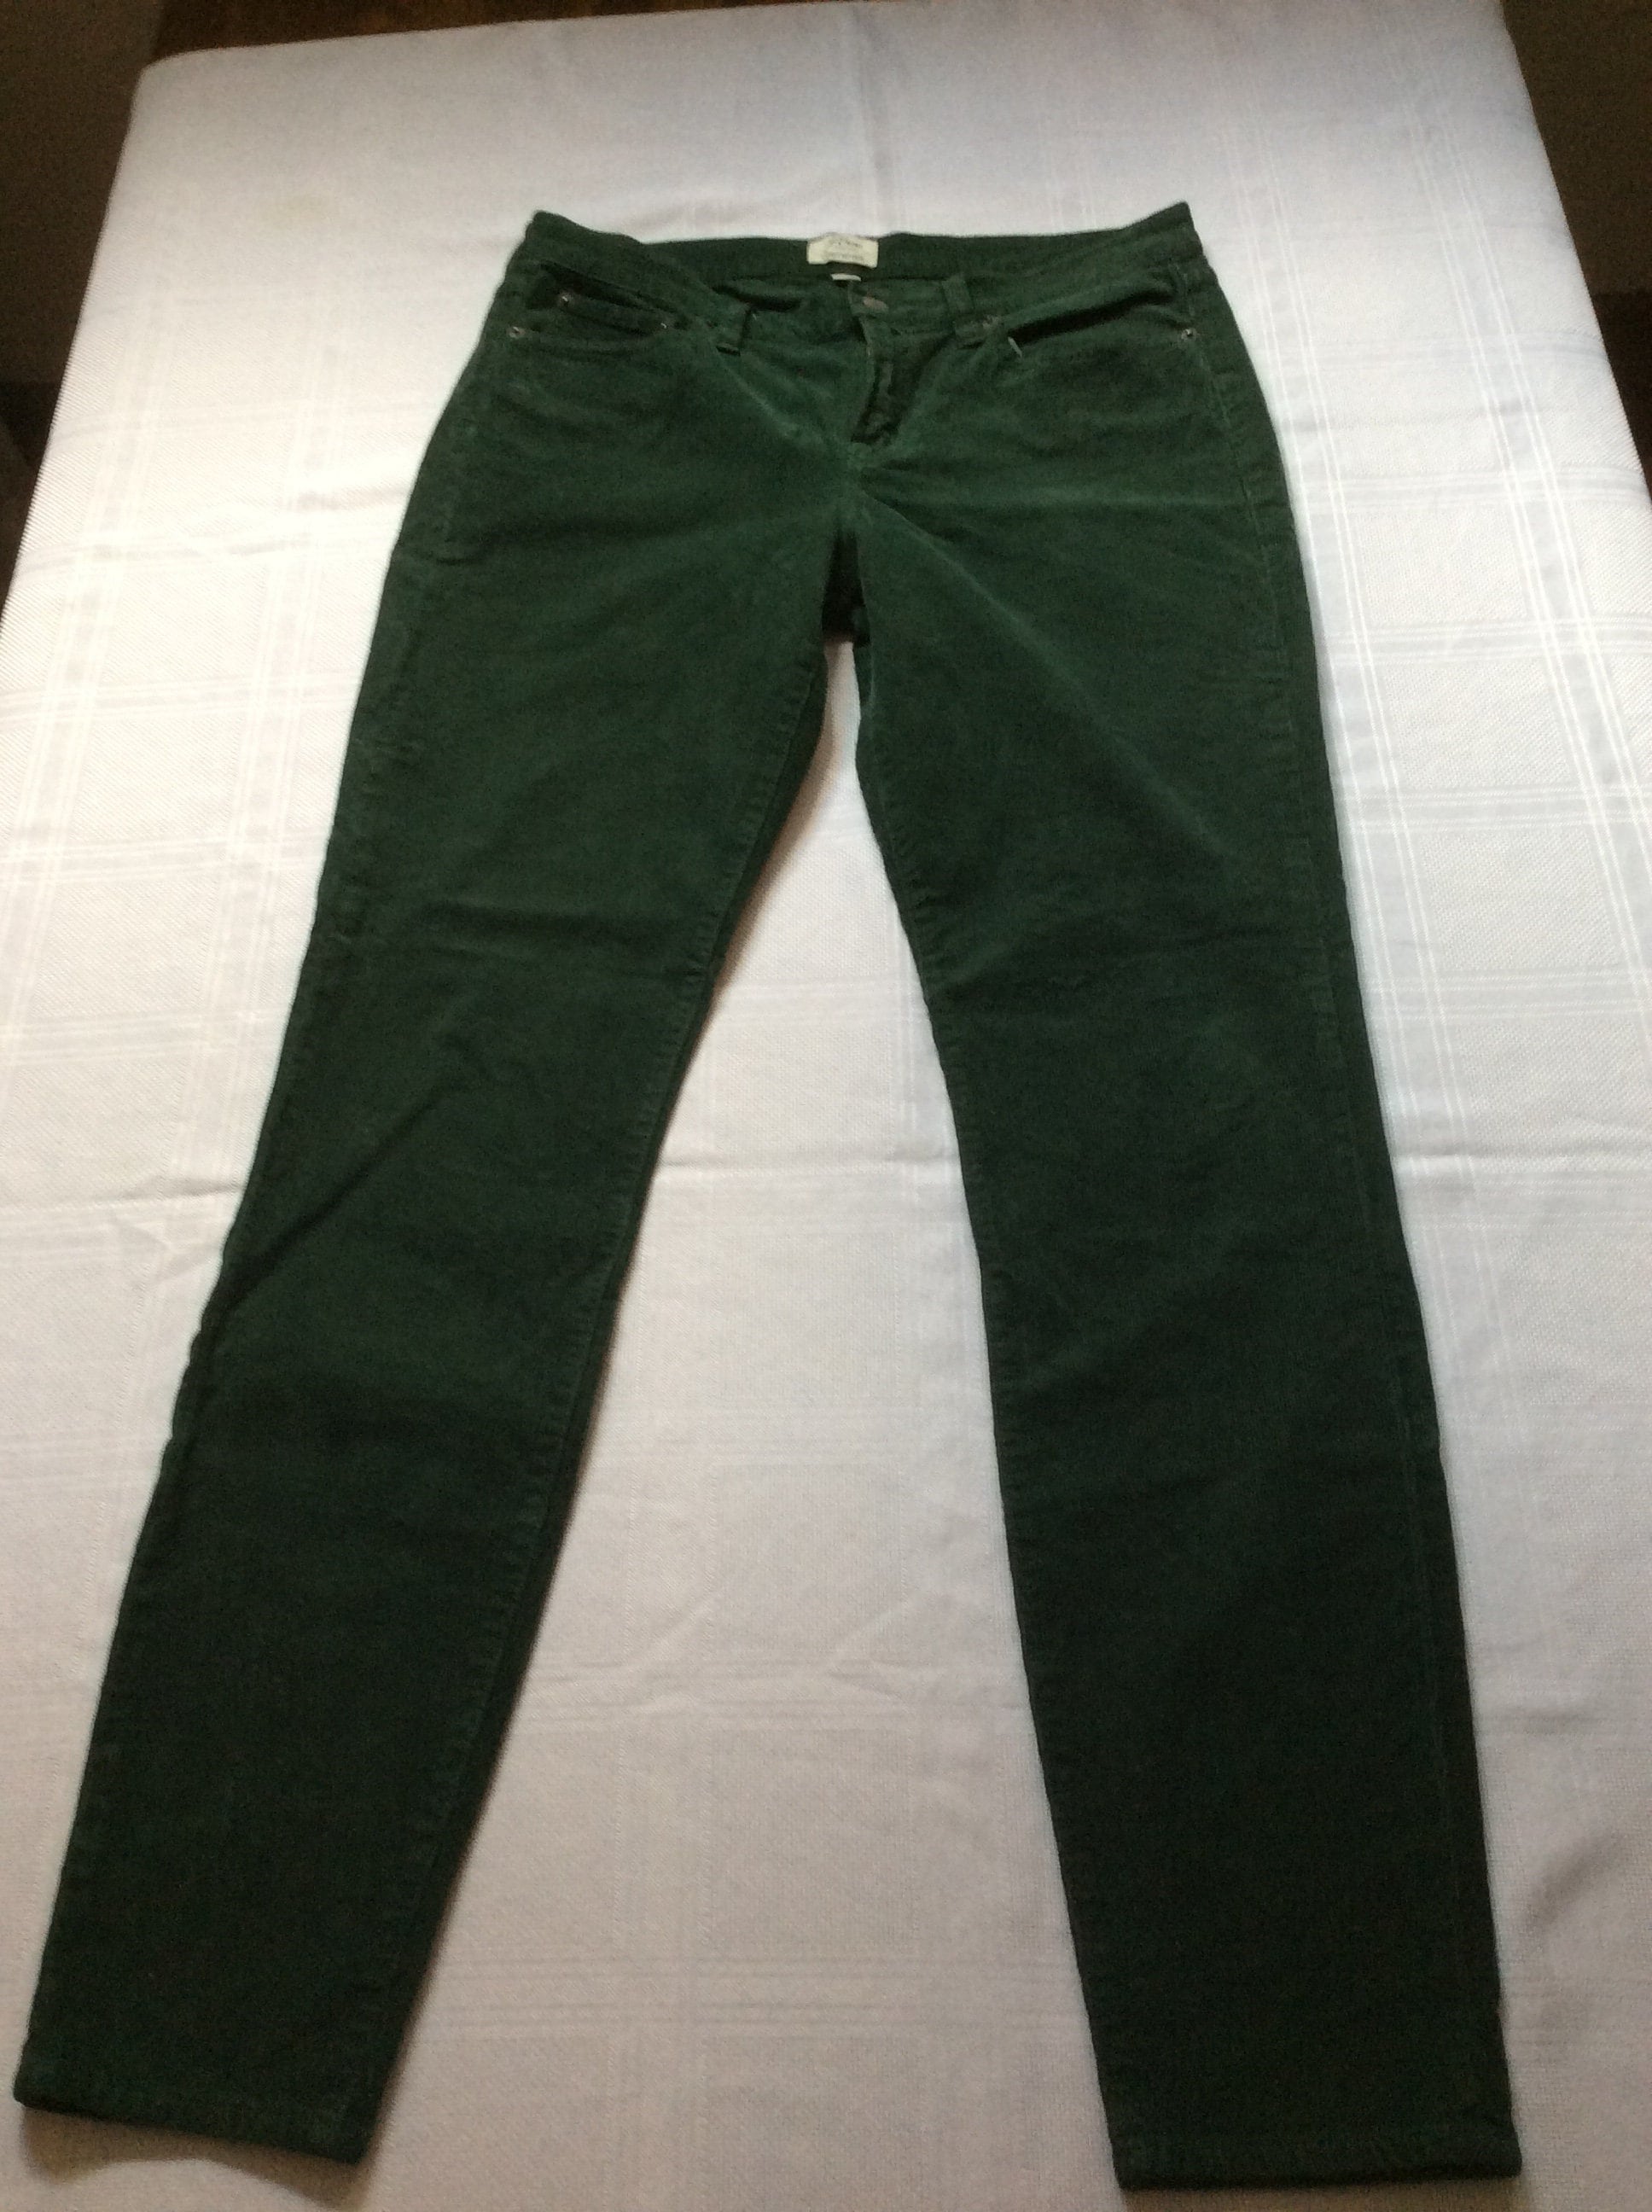 J. Crew Forest Green Medium Waisted Skinny Cords Pants Size 10